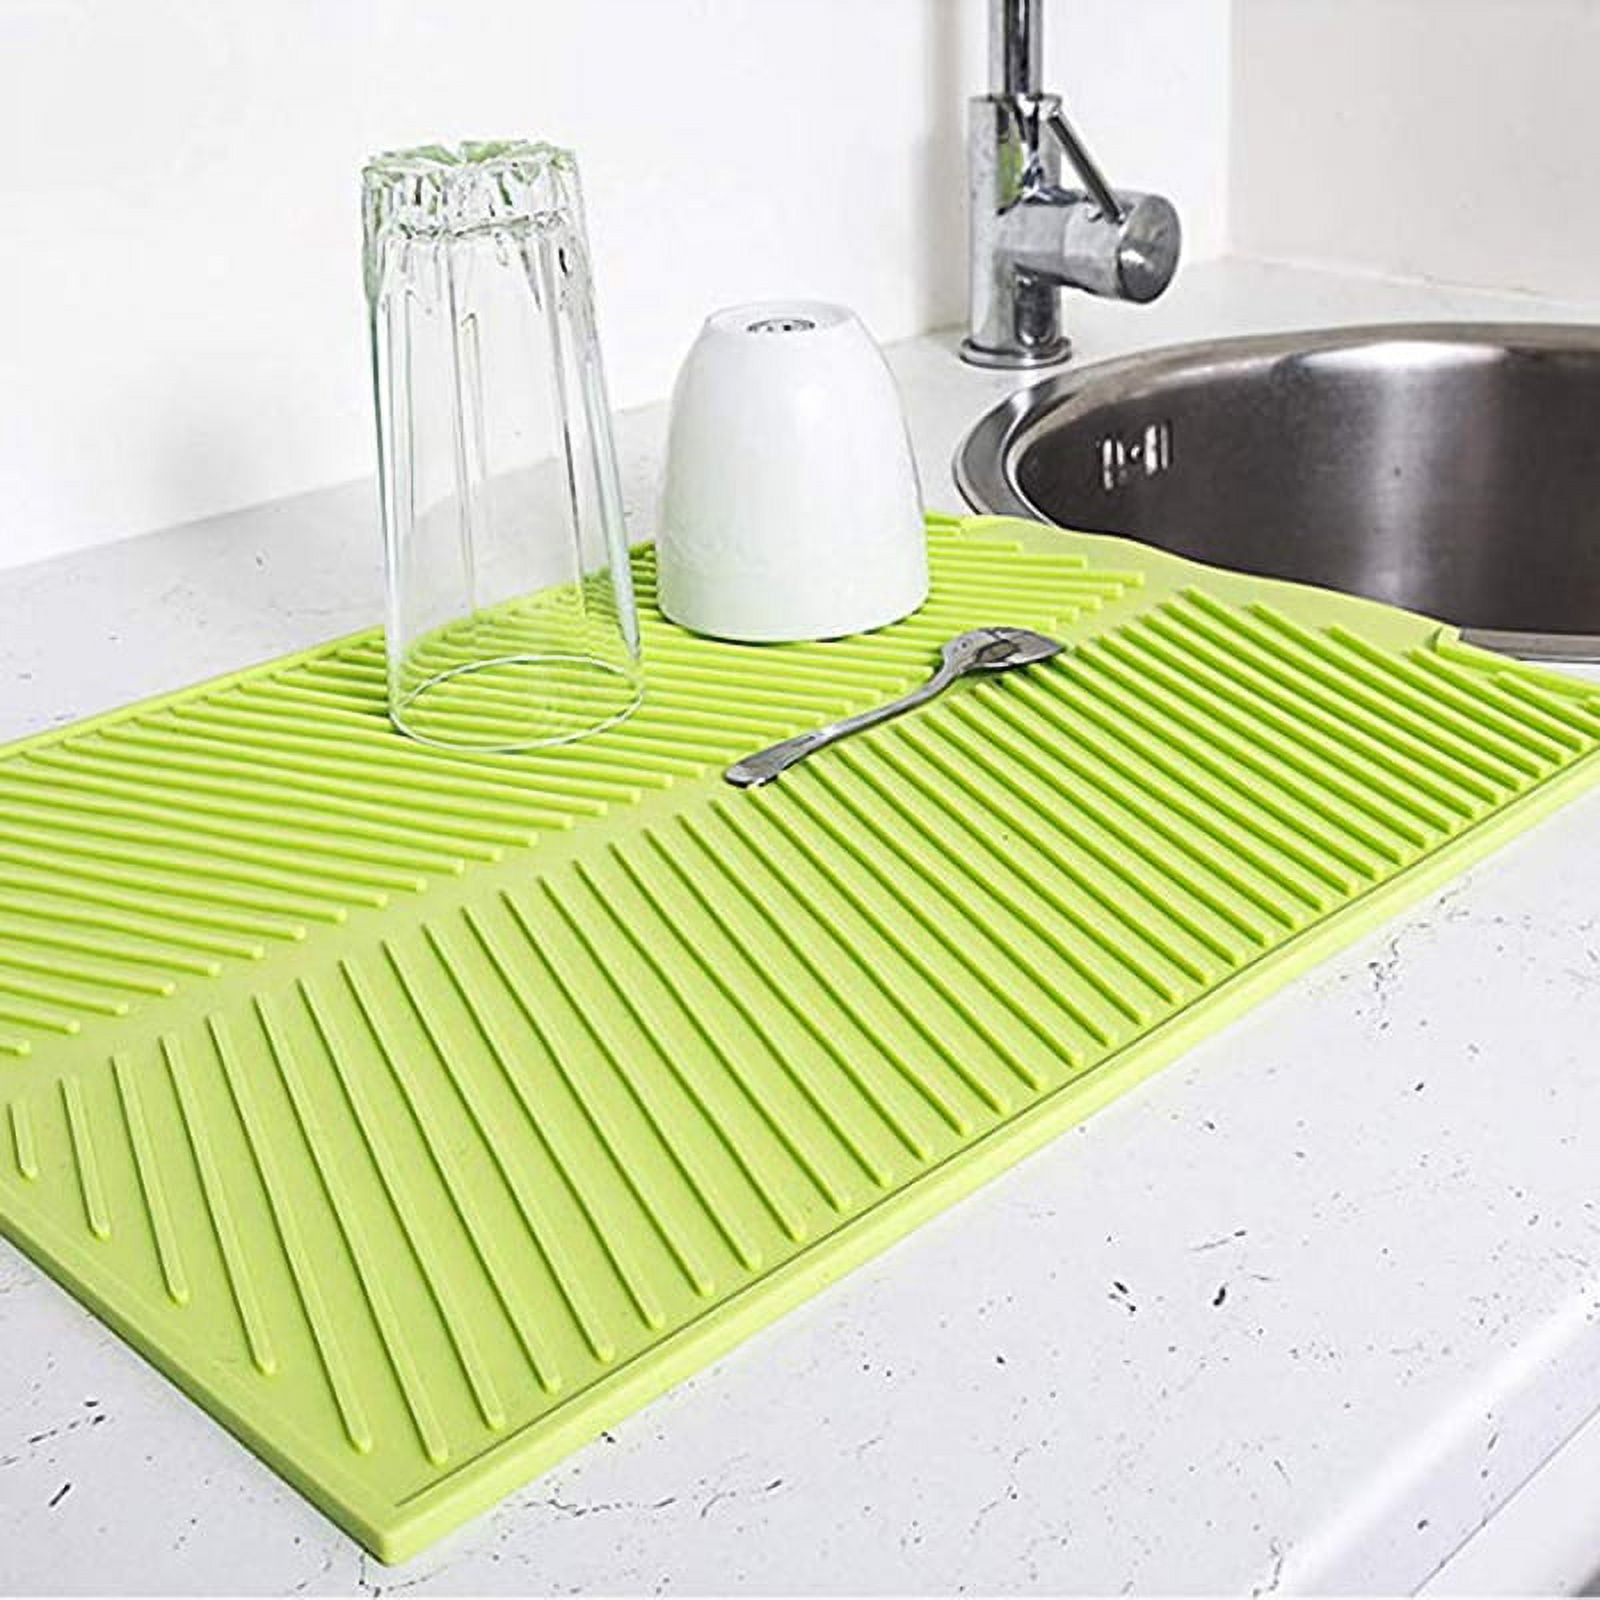 Silicone Dish Drying Mat - XXL 21 x 18 - Extra Large Dish Drying Mat, Counter Top Mat, Dish Draining Mat, Sink Mat, Large Silicone Trivet